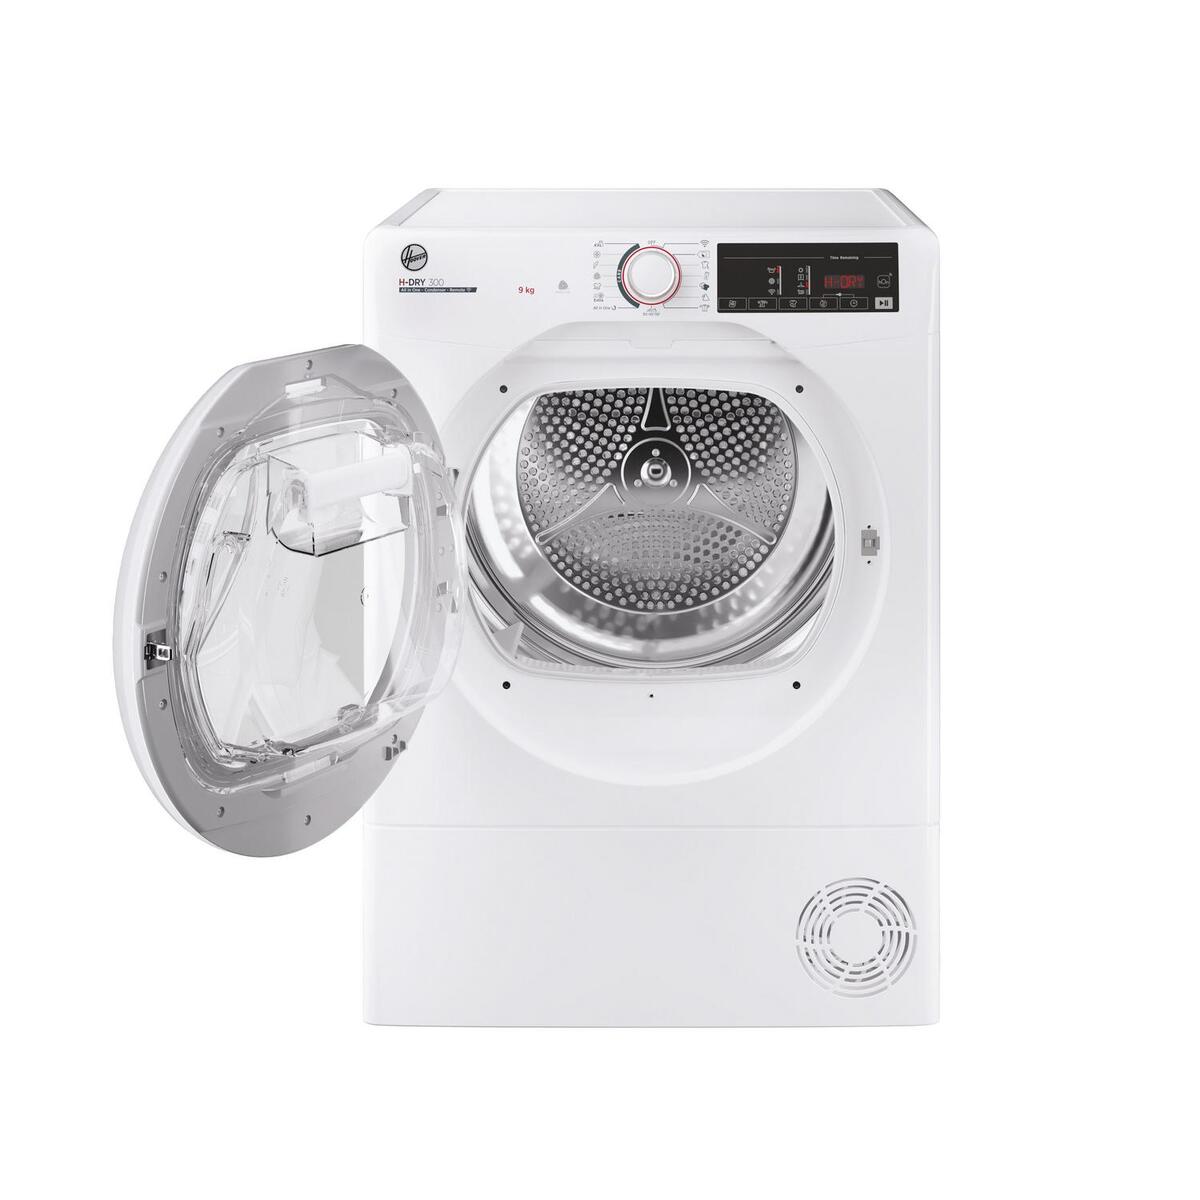 Hoover HLEC9TE 9kg Condenser Tumble Dryer in White